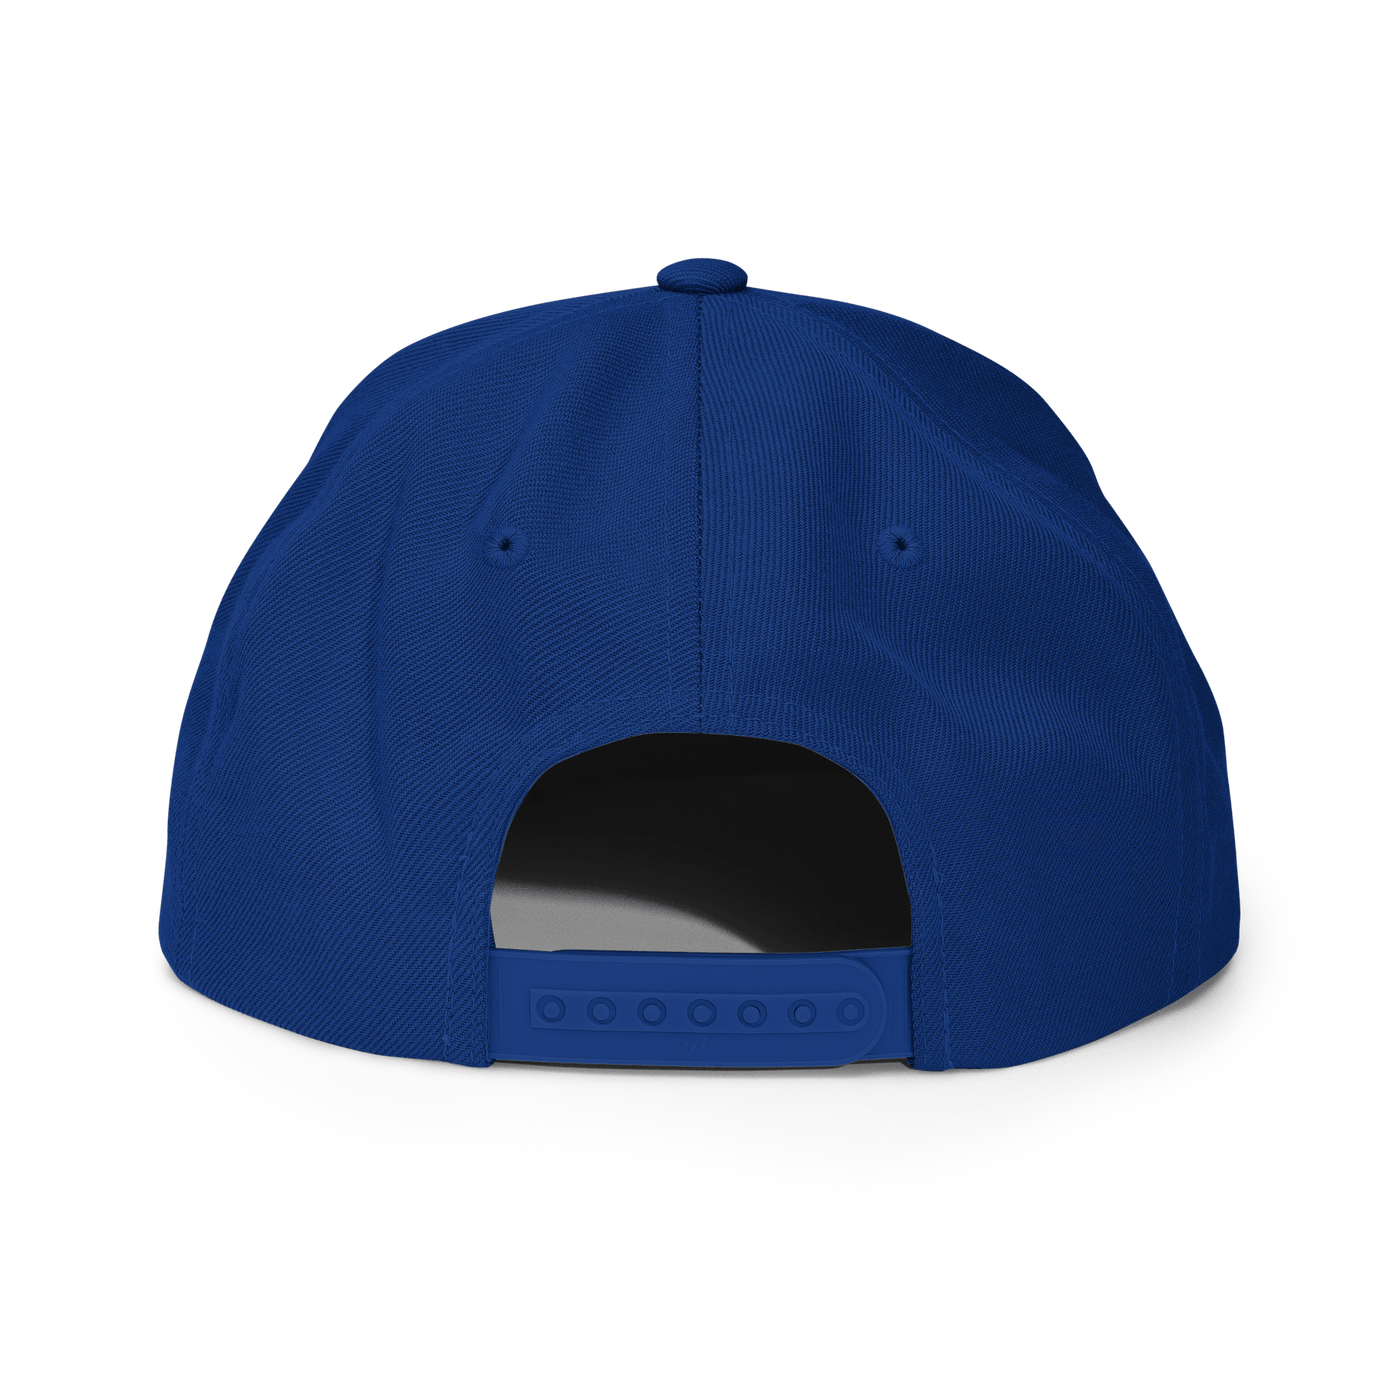 Fries Before Guys Snapback Hat - Royal Blue - - Just Another Cap Store